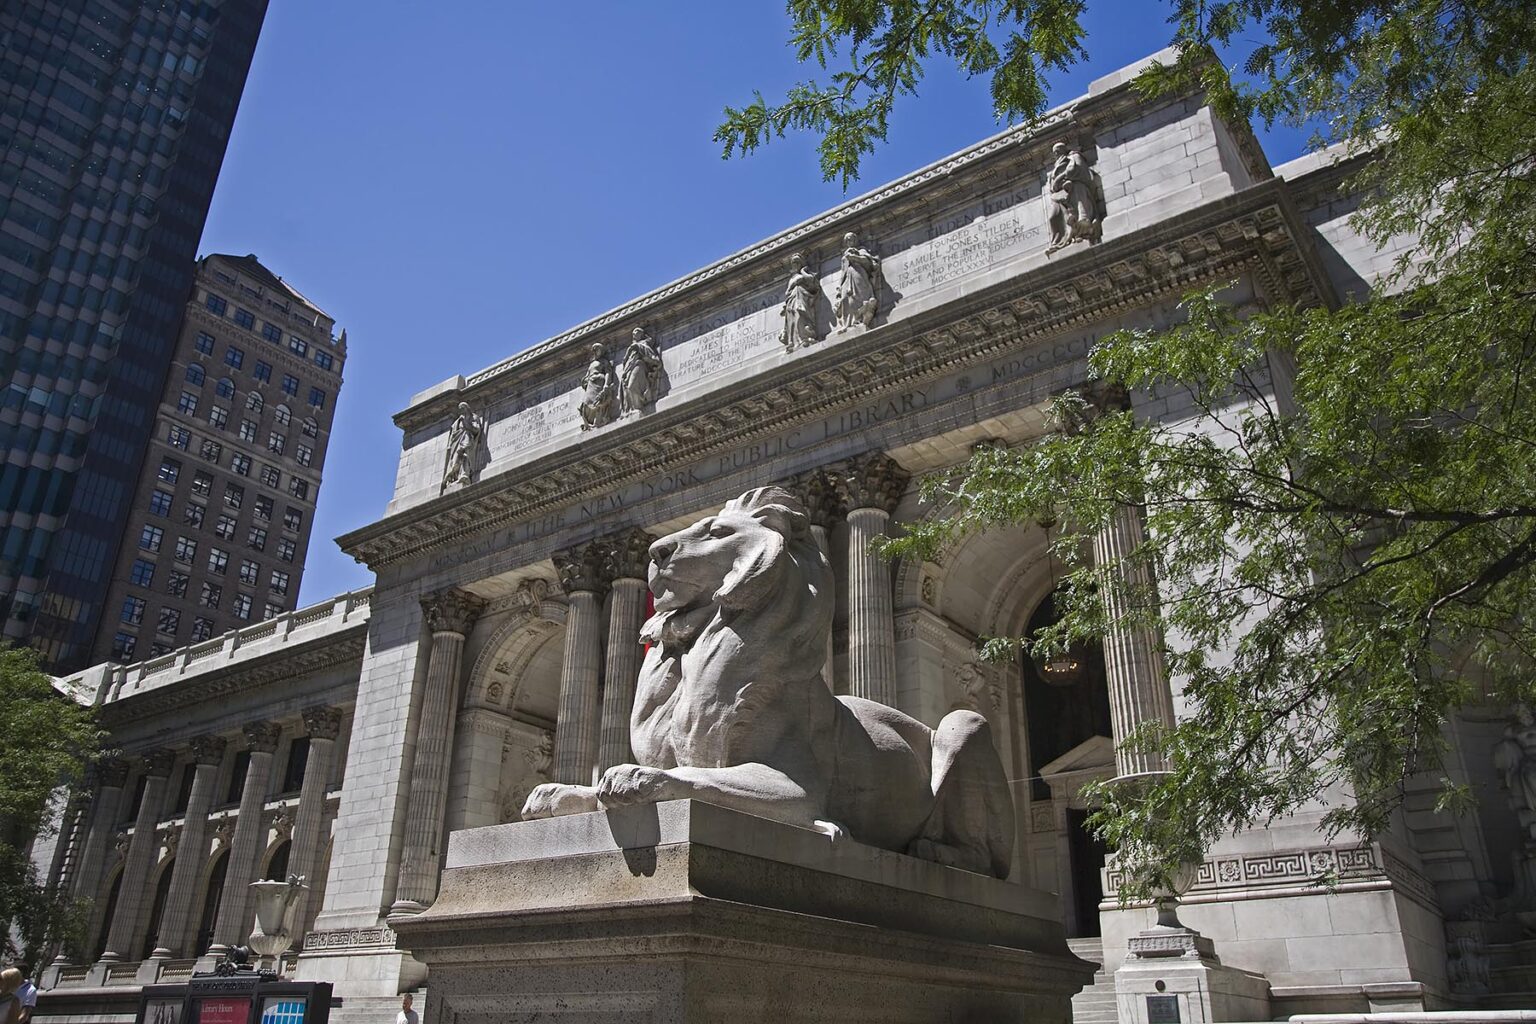 Sculptor EDWARD CLARK POTTER'S LIBRARY LIONS - NEW YORK CITY PUBLIC LIBRARY